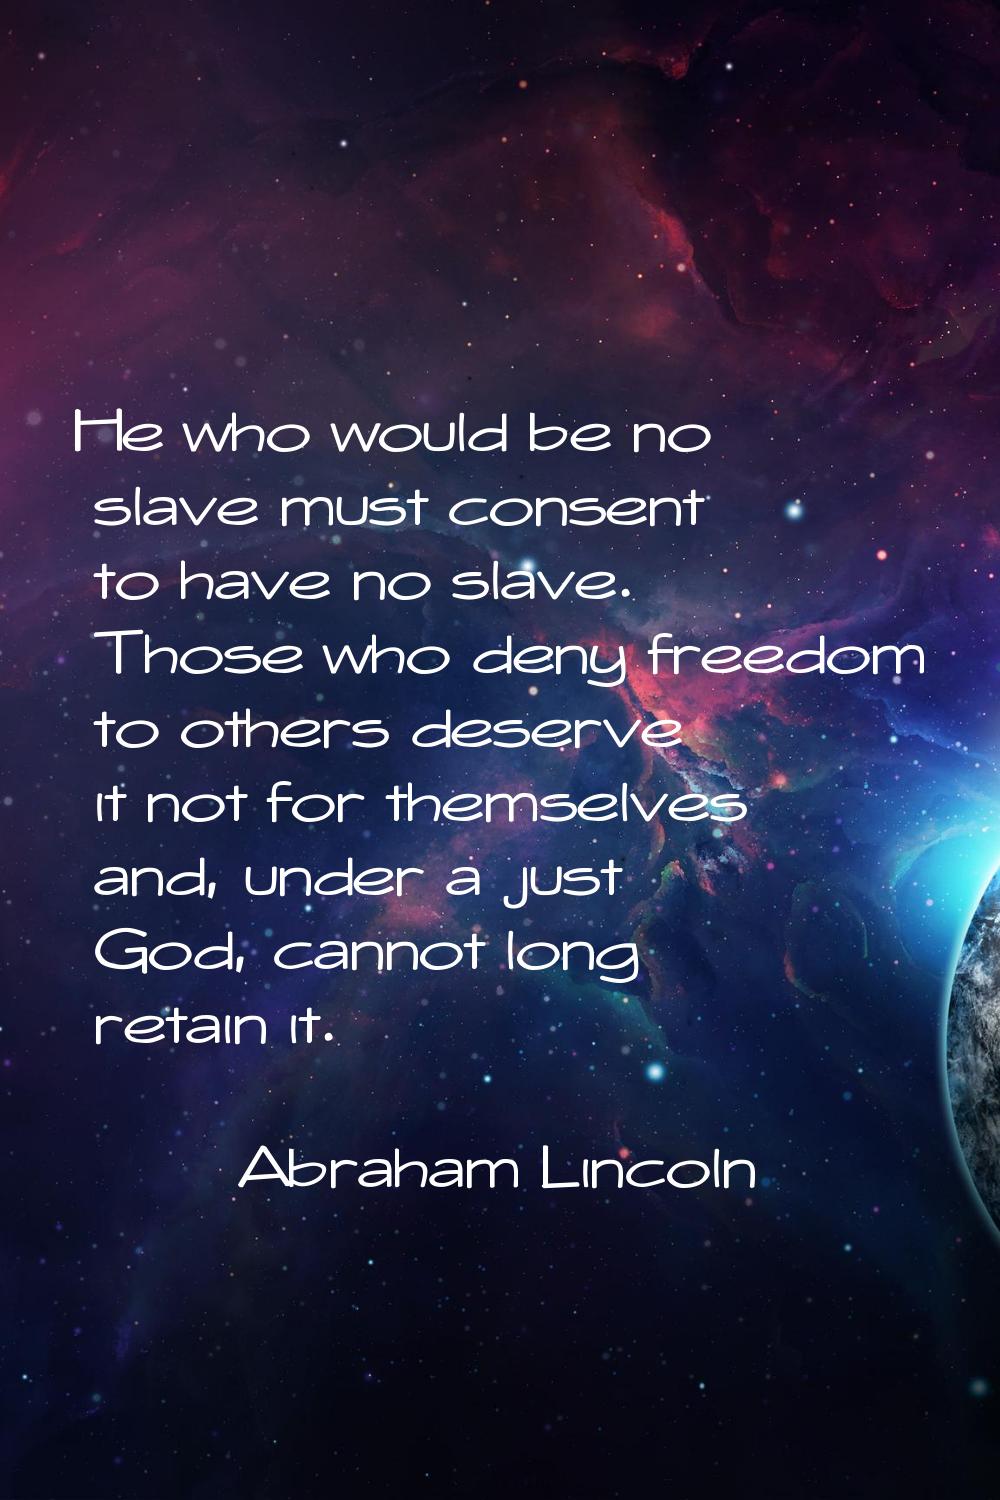 He who would be no slave must consent to have no slave. Those who deny freedom to others deserve it